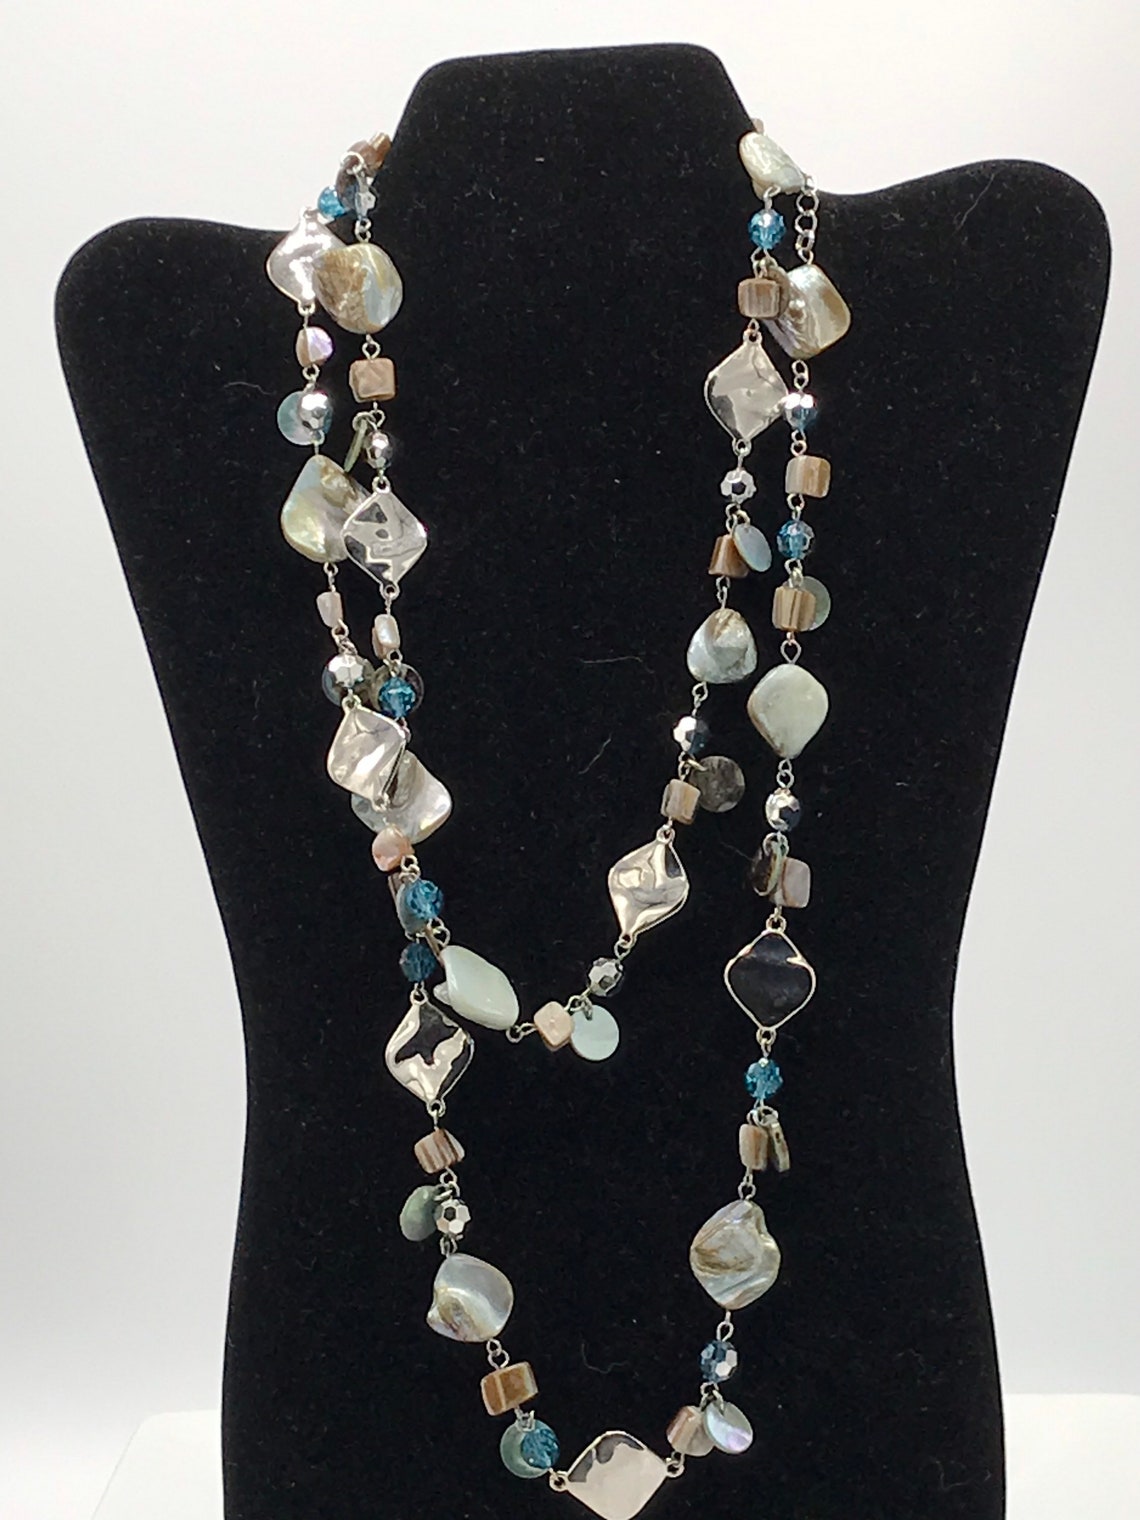 Gorgeous Abalone and Silver Tone Necklace by Lia Sophia Long - Etsy UK